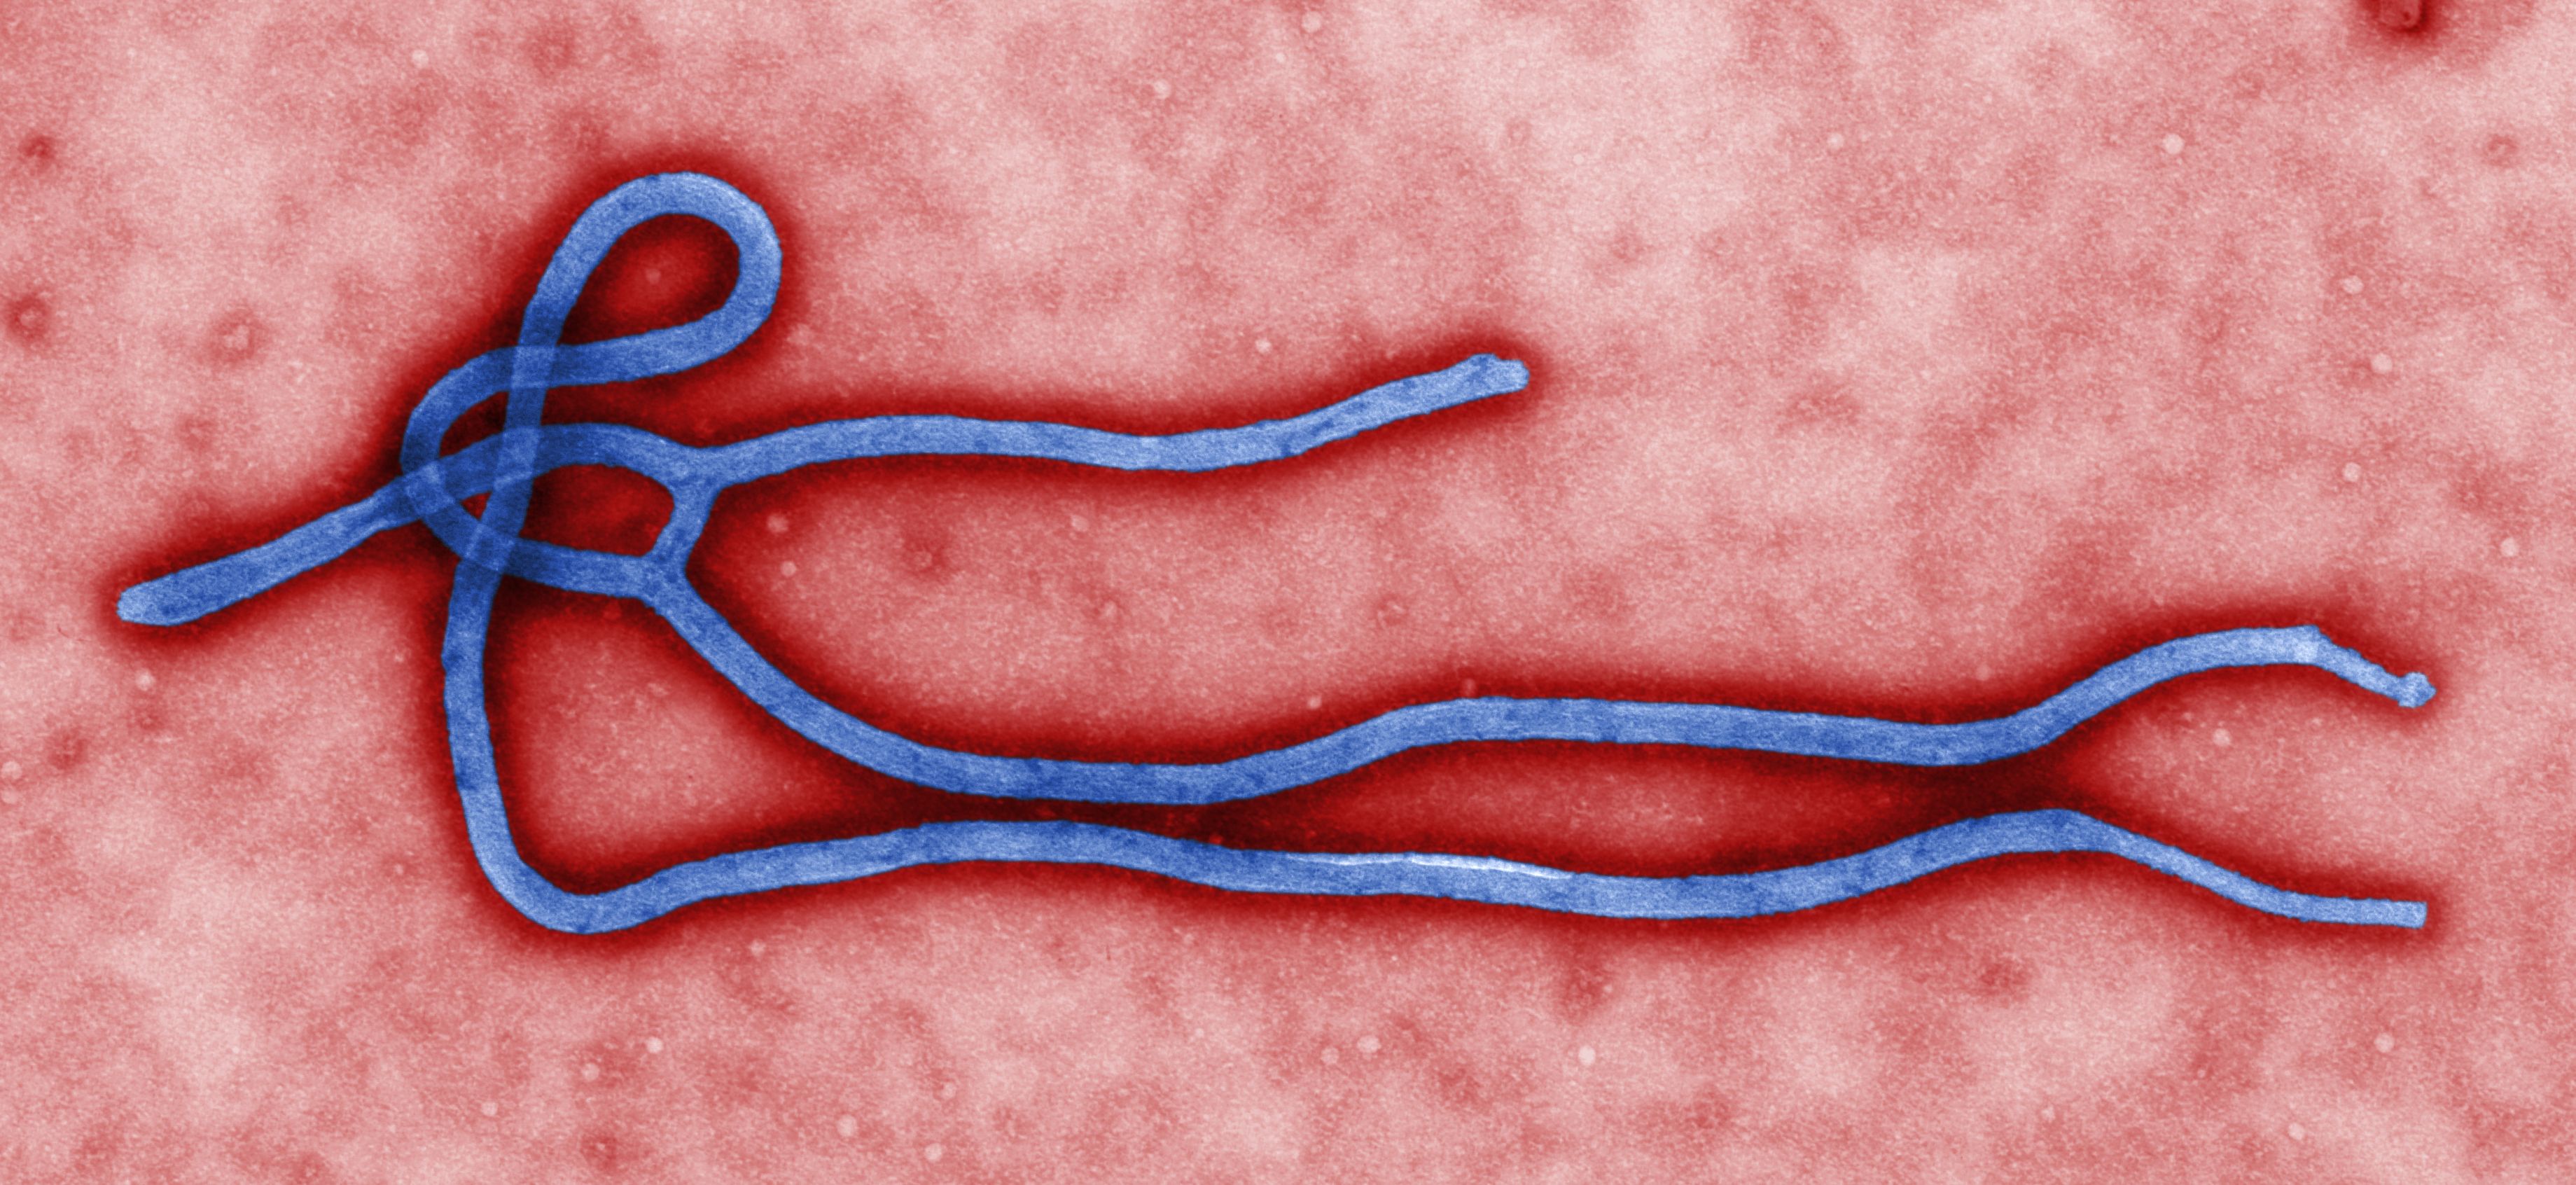 Support these four organizations to help fight Ebola